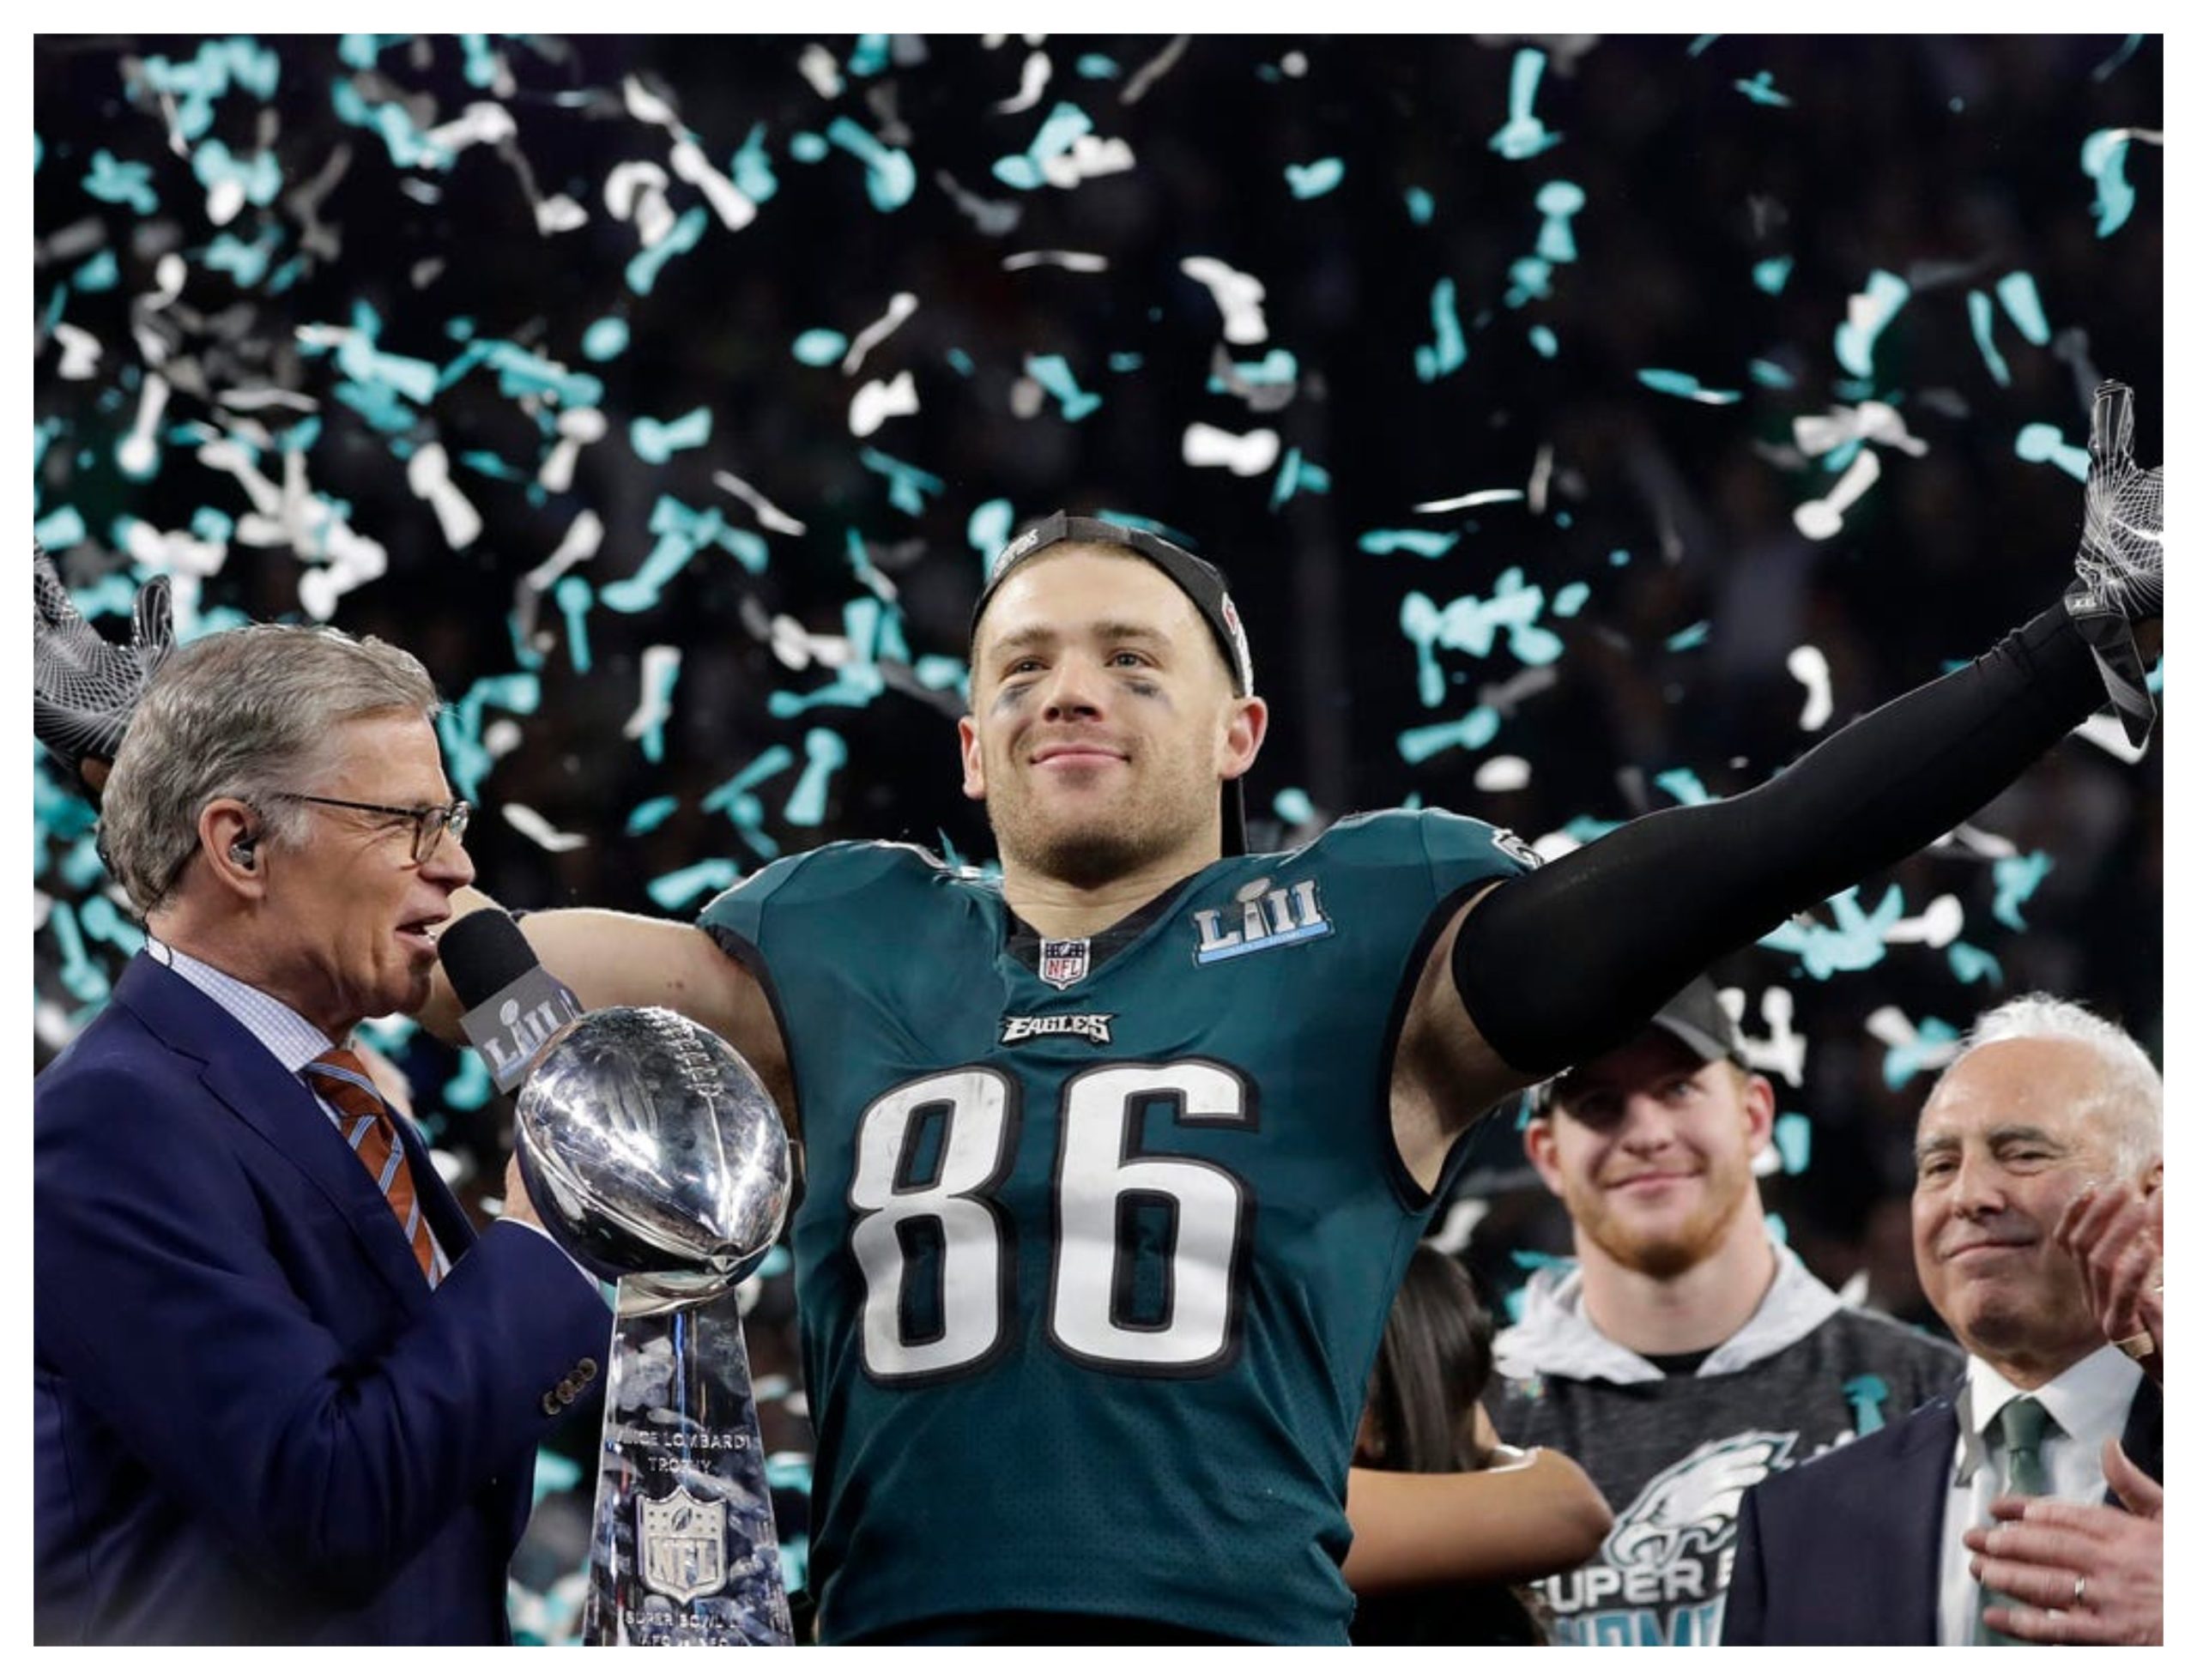 Has the Philadelphia Eagles ever won a Super Bowl? What teams did the